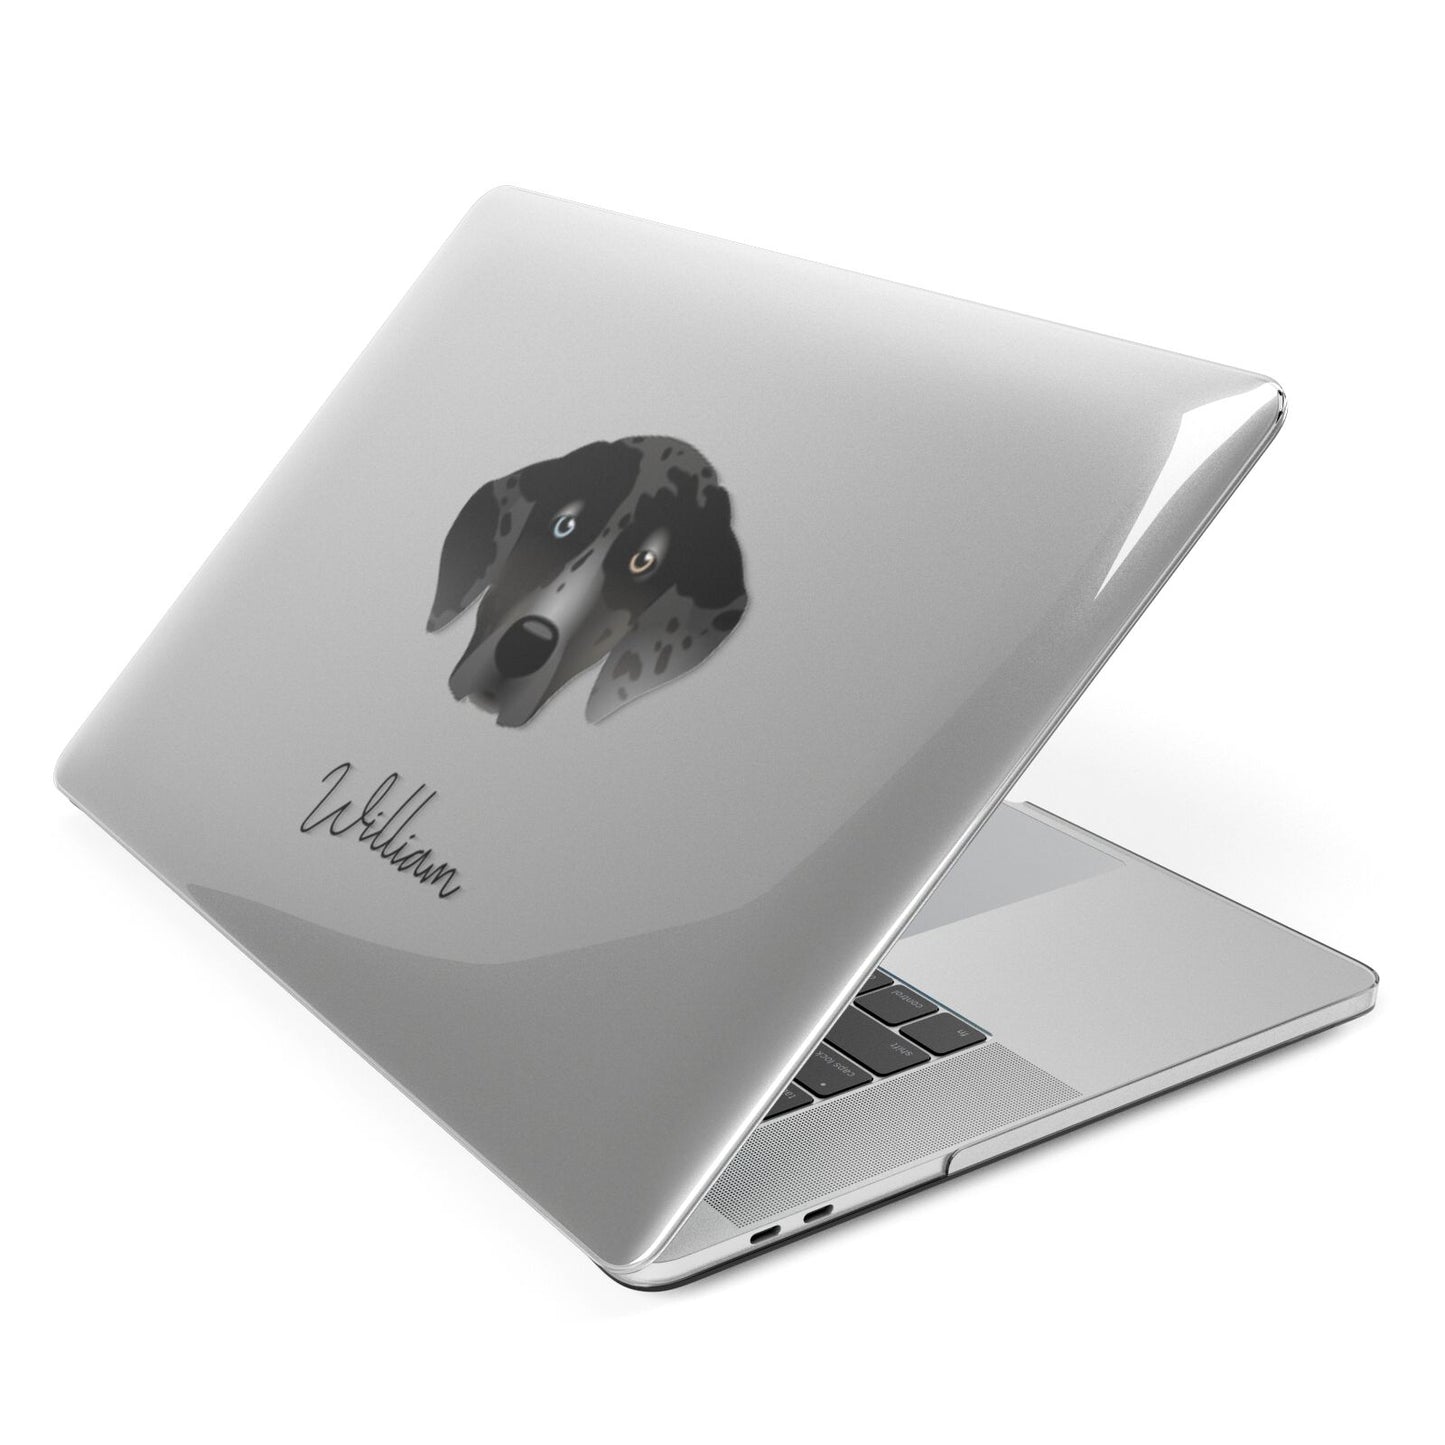 Catahoula Leopard Dog Personalised Apple MacBook Case Side View